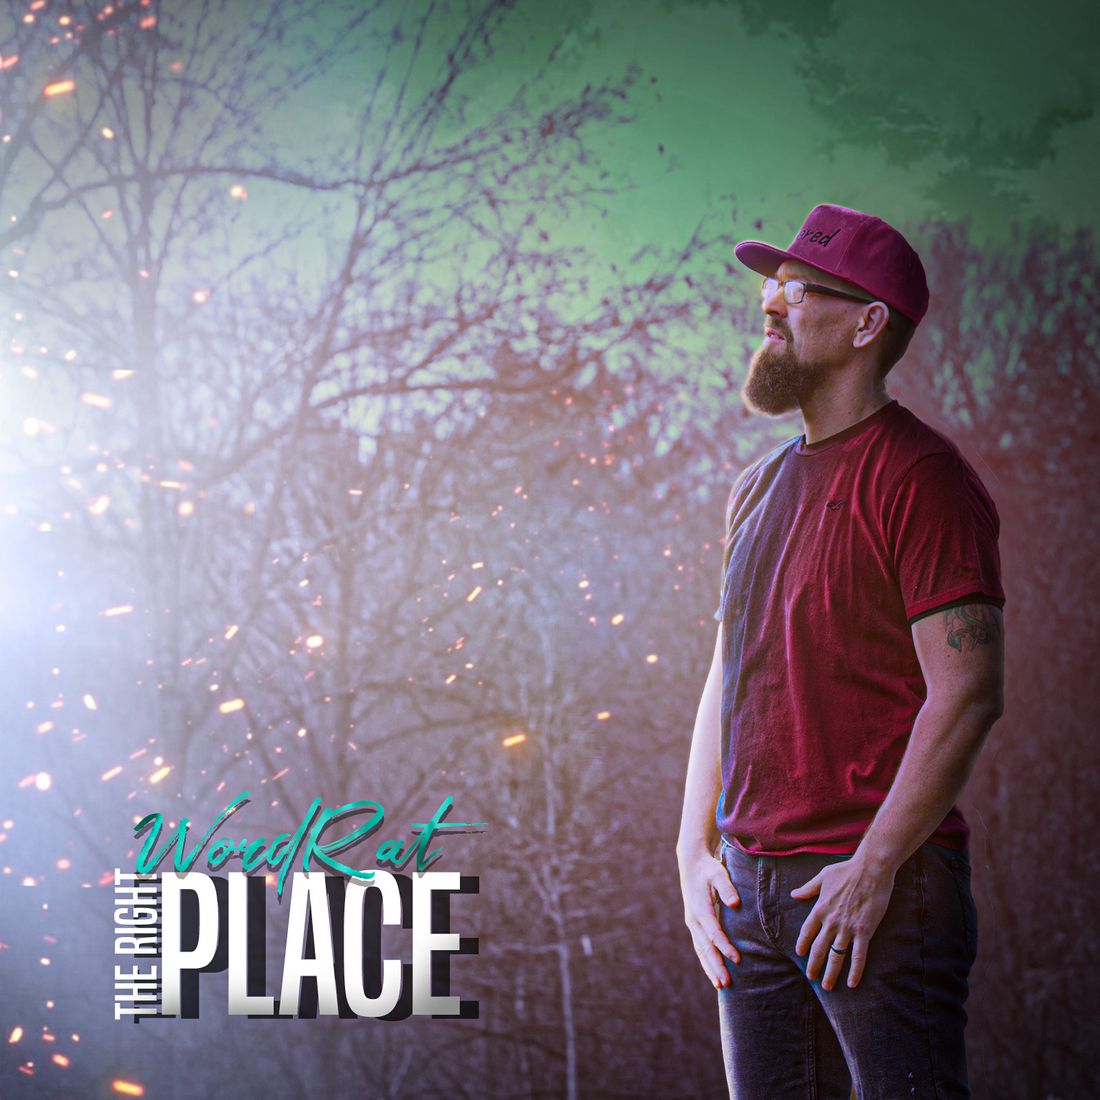 The Right Place - Single Release 2/11/2022
